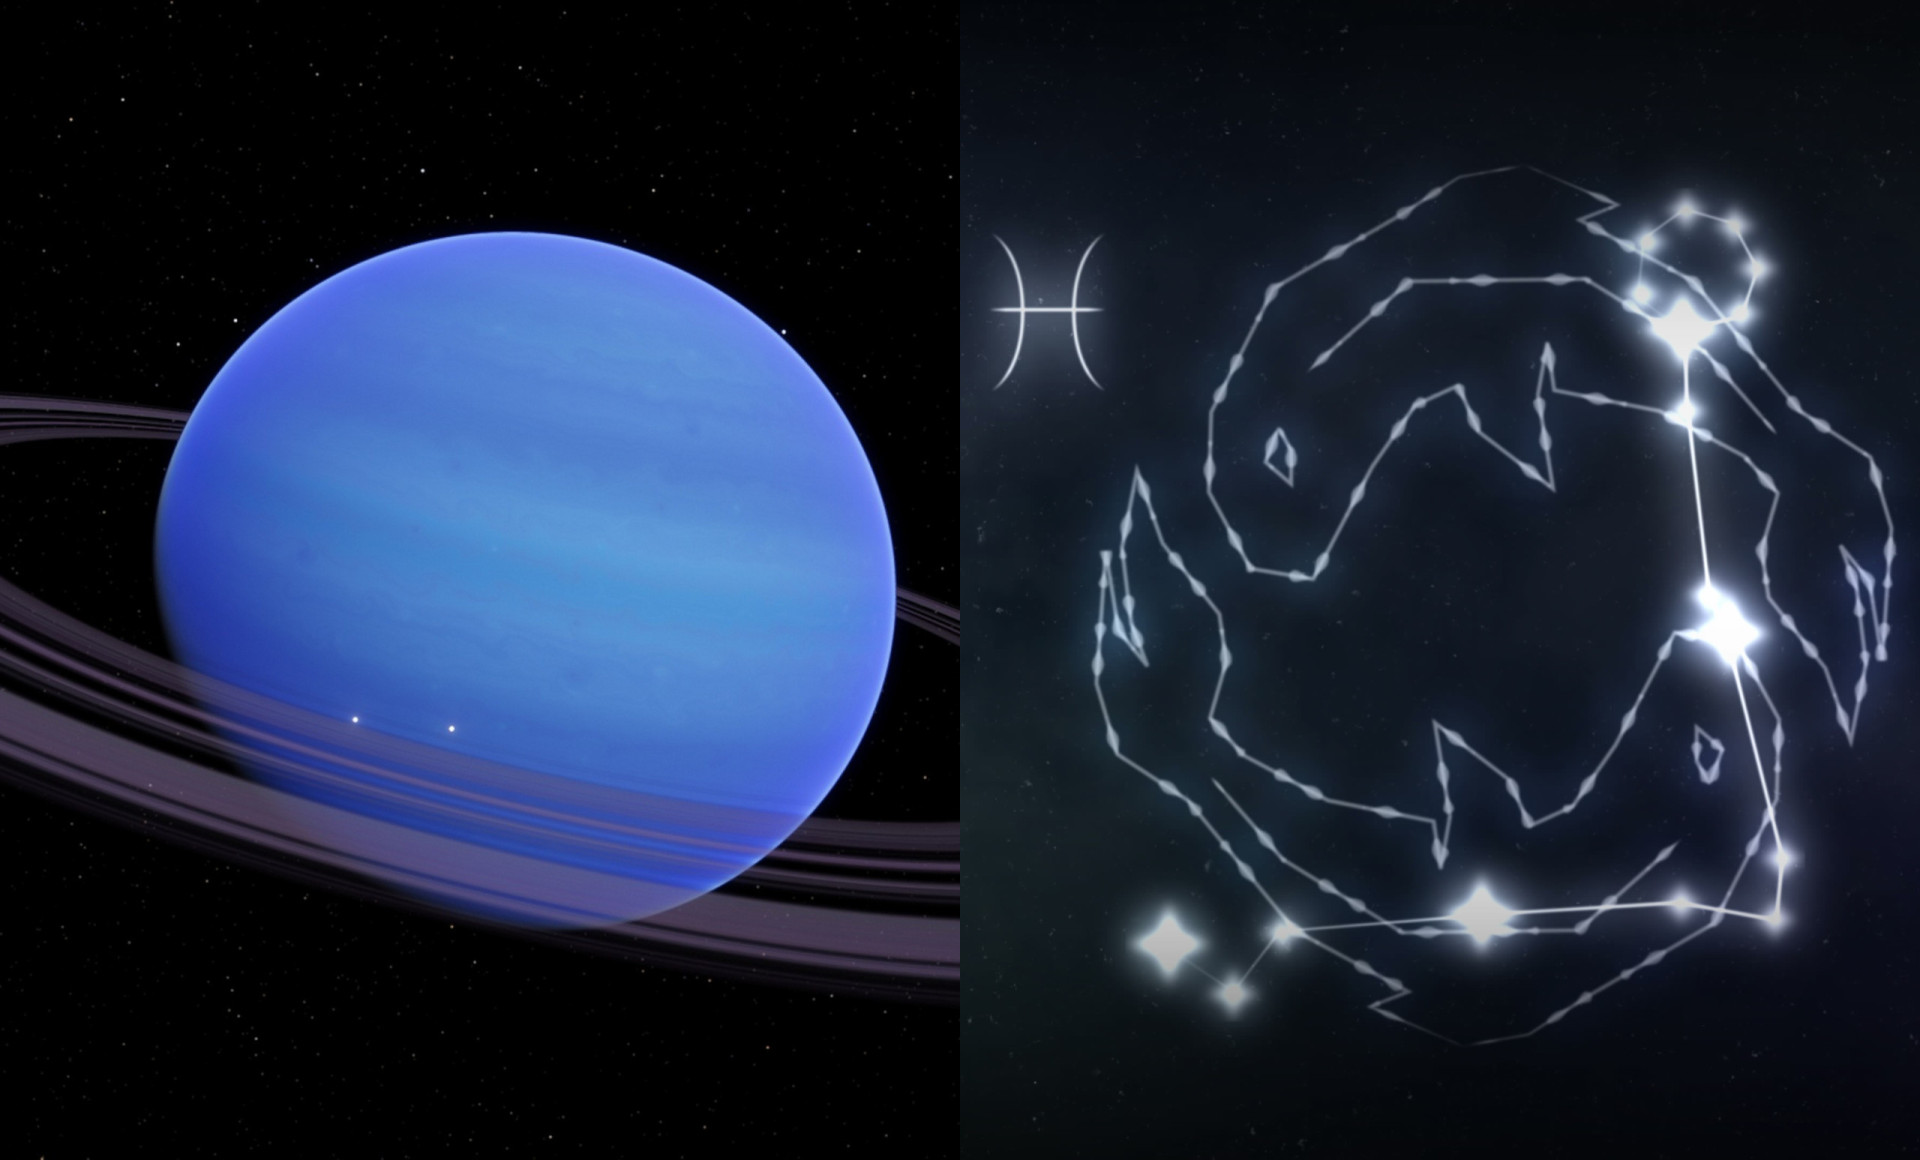 <p>On July 2, Neptune stations retrograde, appearing to move backwards from our vantage point on Earth. This annual celestial event will continue until December 2.</p><p><a href="https://www.msn.com/en-ca/community/channel/vid-7xx8mnucu55yw63we9va2gwr7uihbxwc68fxqp25x6tg4ftibpra?cvid=94631541bc0f4f89bfd59158d696ad7e">Follow us and access great exclusive content every day</a></p>